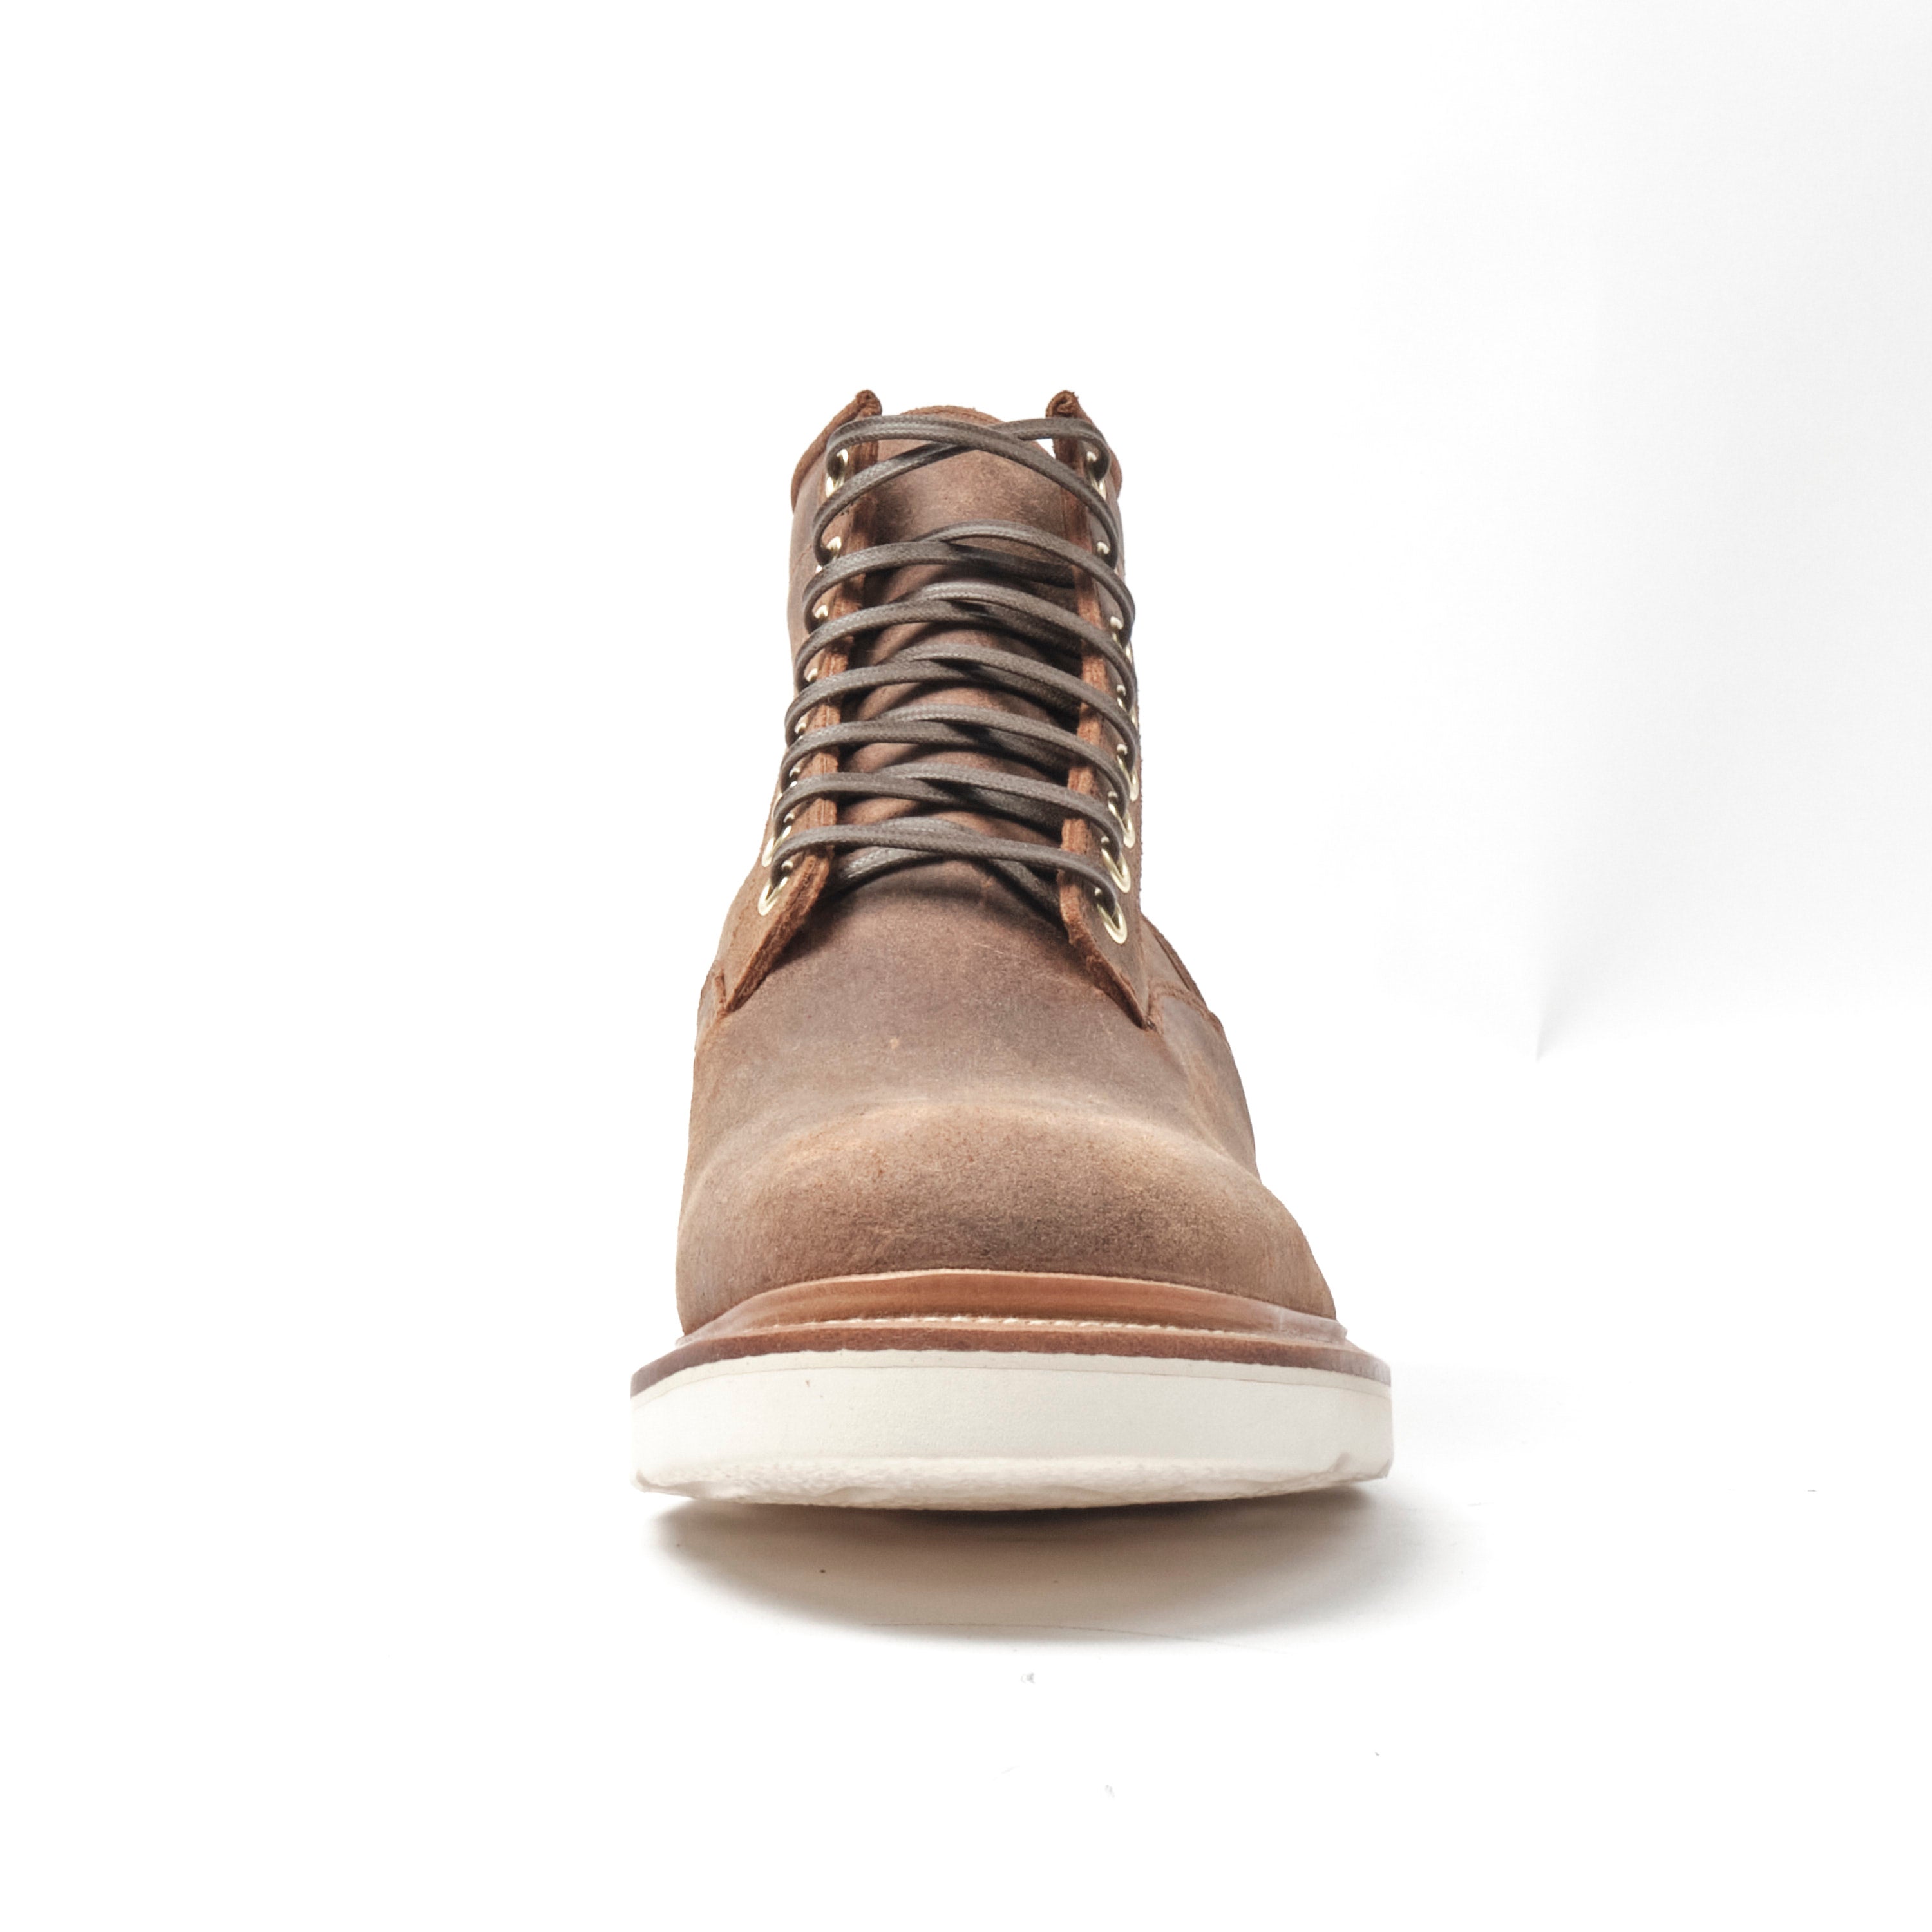 VIBERG SCOUT BOOT - RAWHIDE WAXY COMMANDER